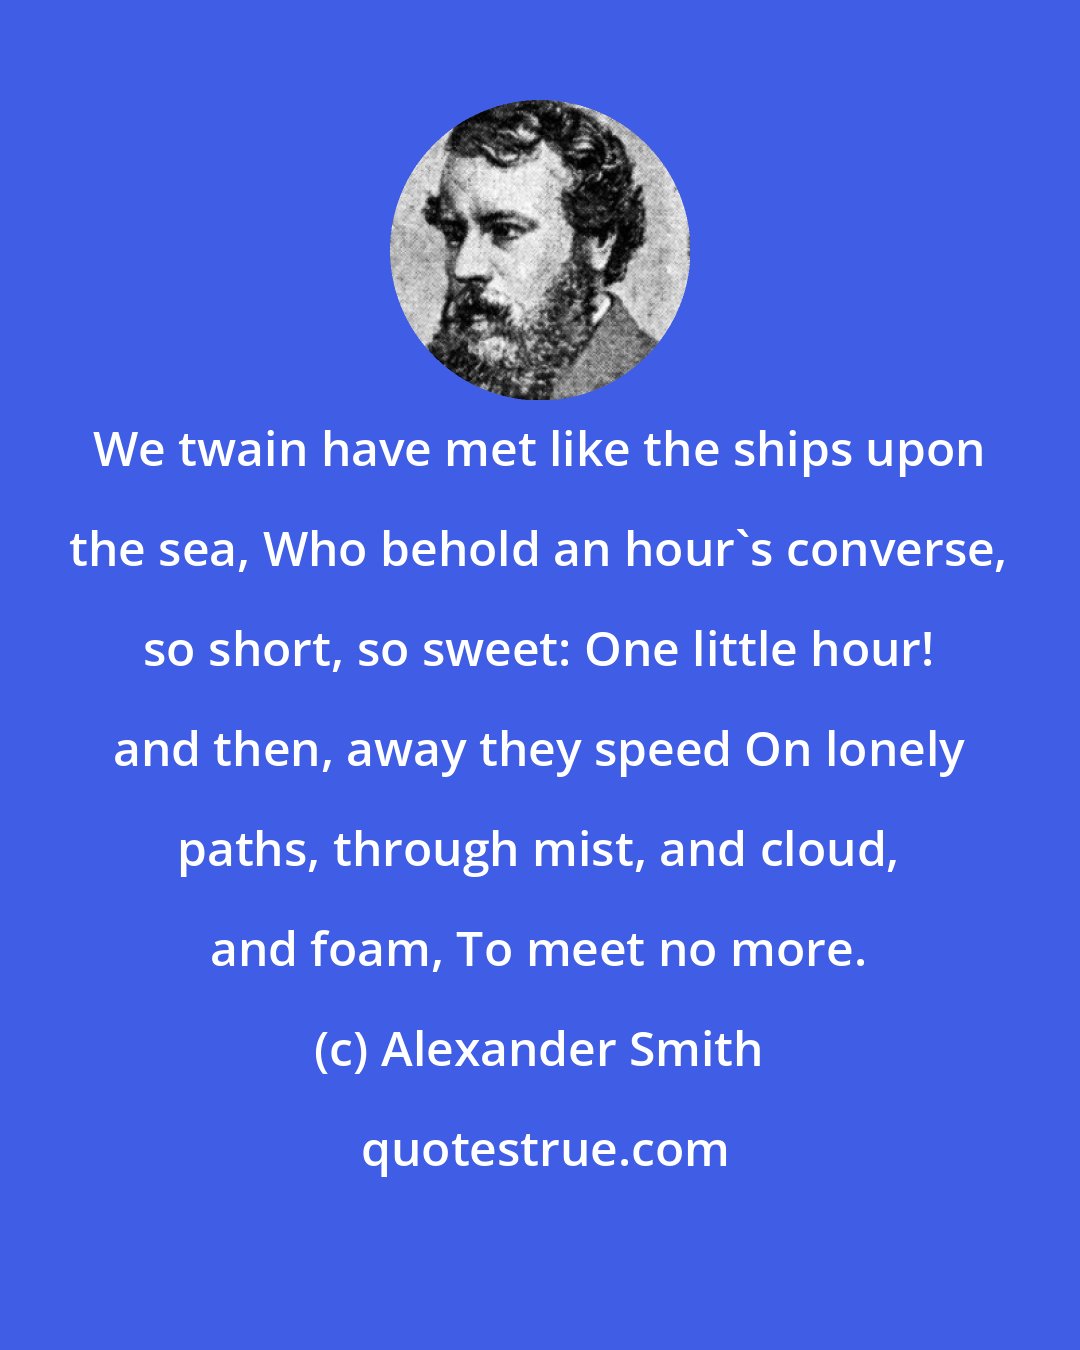 Alexander Smith: We twain have met like the ships upon the sea, Who behold an hour's converse, so short, so sweet: One little hour! and then, away they speed On lonely paths, through mist, and cloud, and foam, To meet no more.